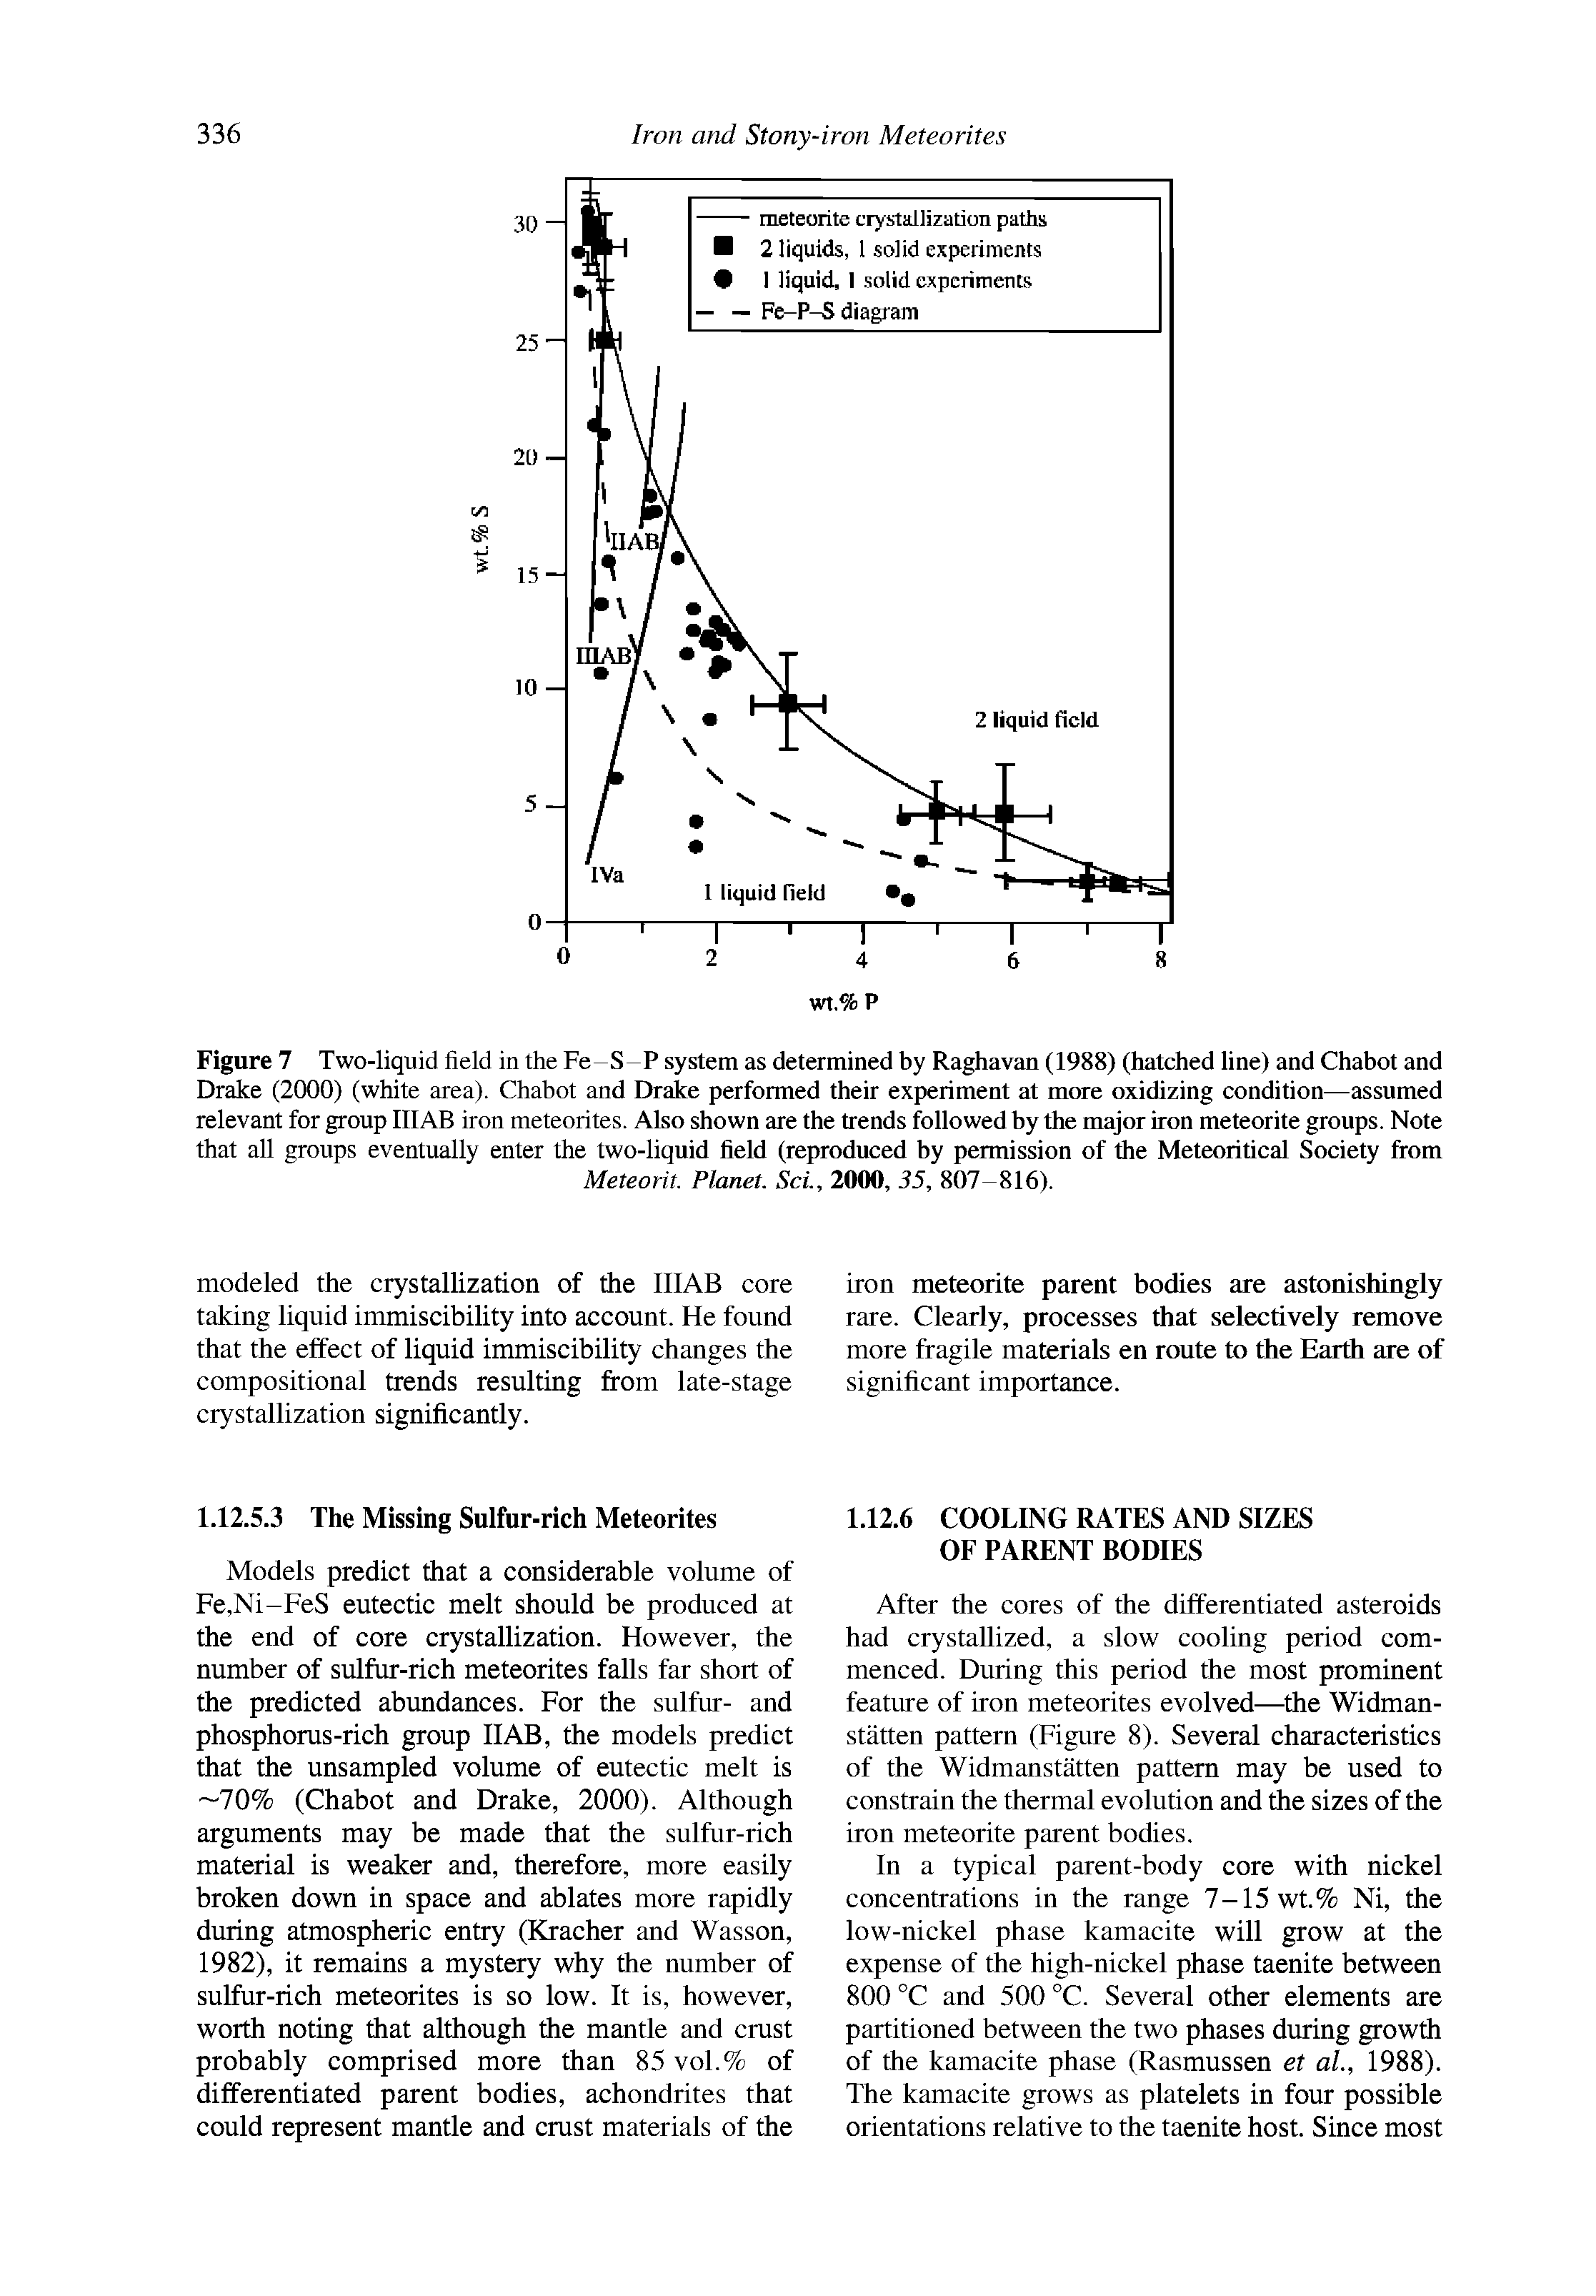 Figure 7 Two-liquid field in the Fe-S-P system as determined by Raghavan (1988) (hatched line) and Chabot and Drake (2000) (white area). Chabot and Drake performed their experiment at more oxidizing condition—assumed relevant for group IIIAB iron meteorites. Also shown are the trends followed by the major iron meteorite groups. Note that all groups eventually enter the two-liquid field (reproduced by permission of the Meteoritical Society from...